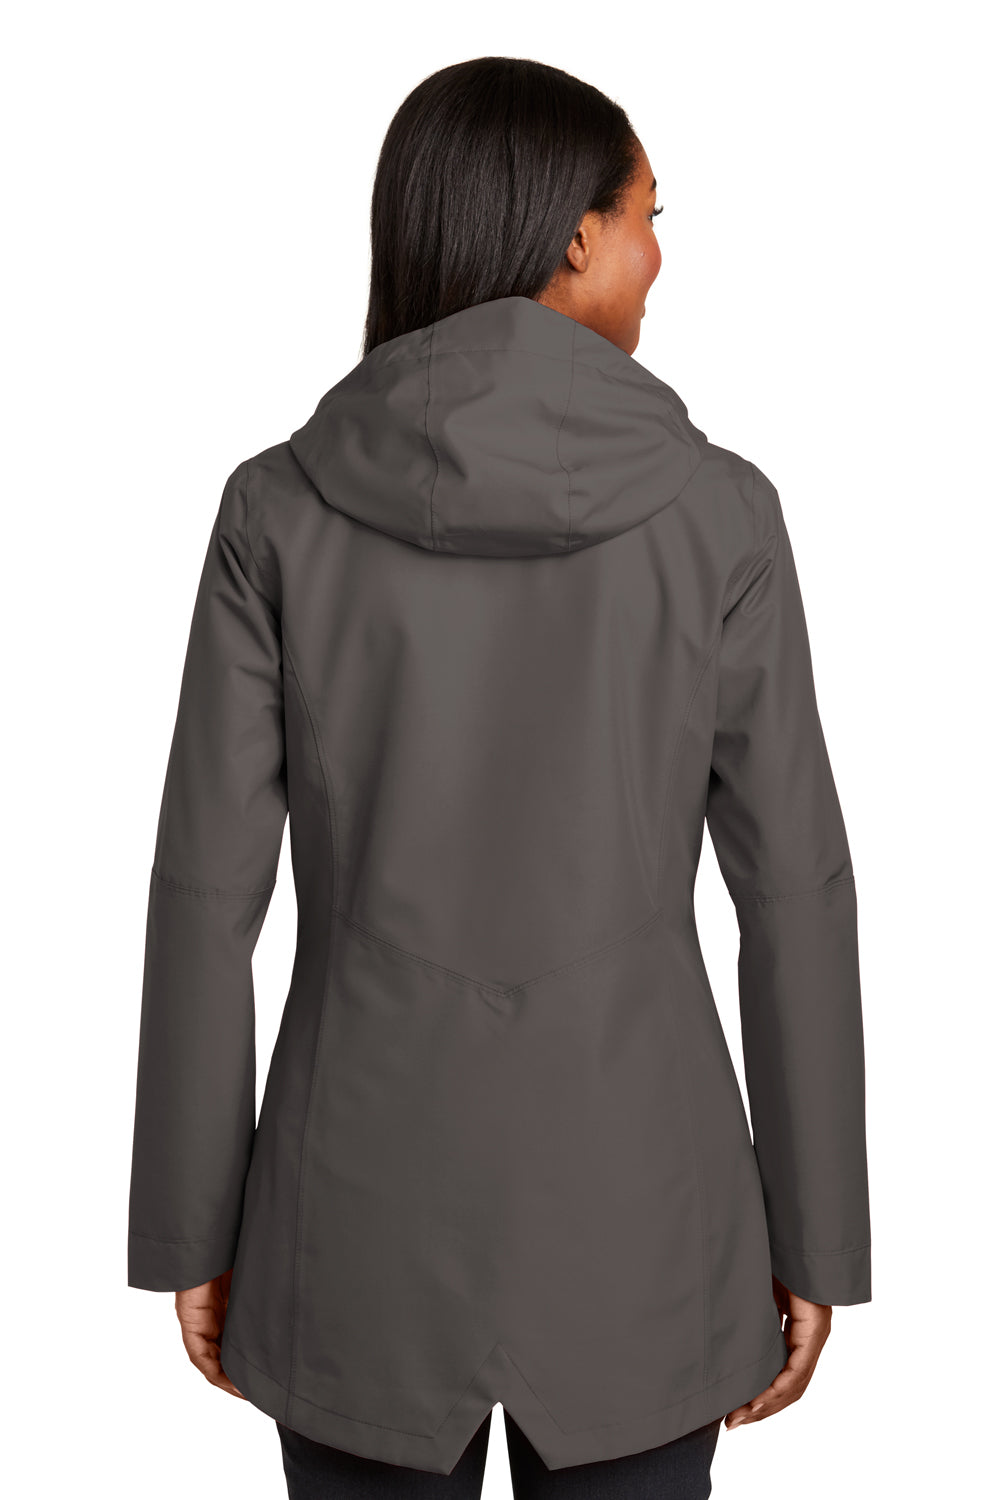 Port Authority L900 Womens Collective Waterproof Full Zip Hooded Jacket Graphite Grey Back